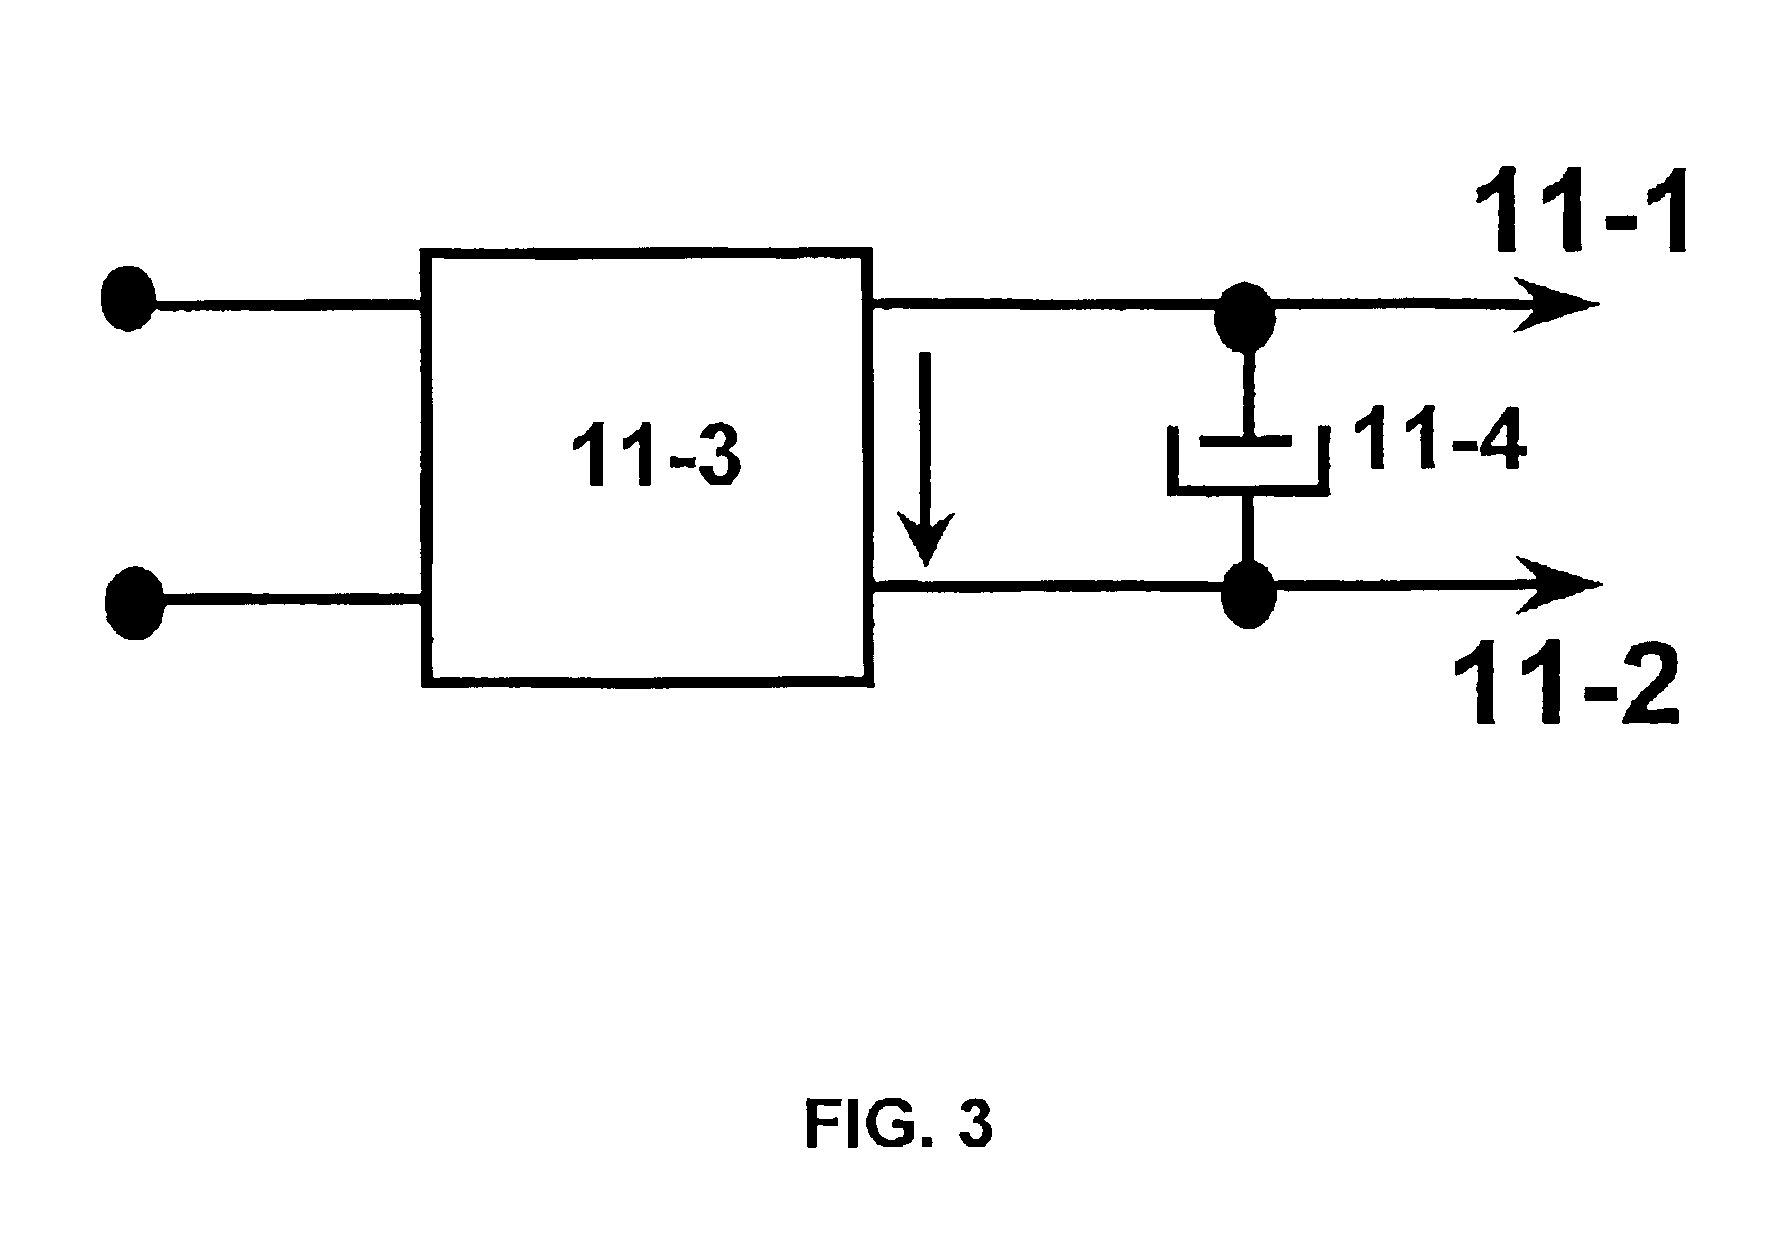 Switched power supply converter with a piezoelectric transformer